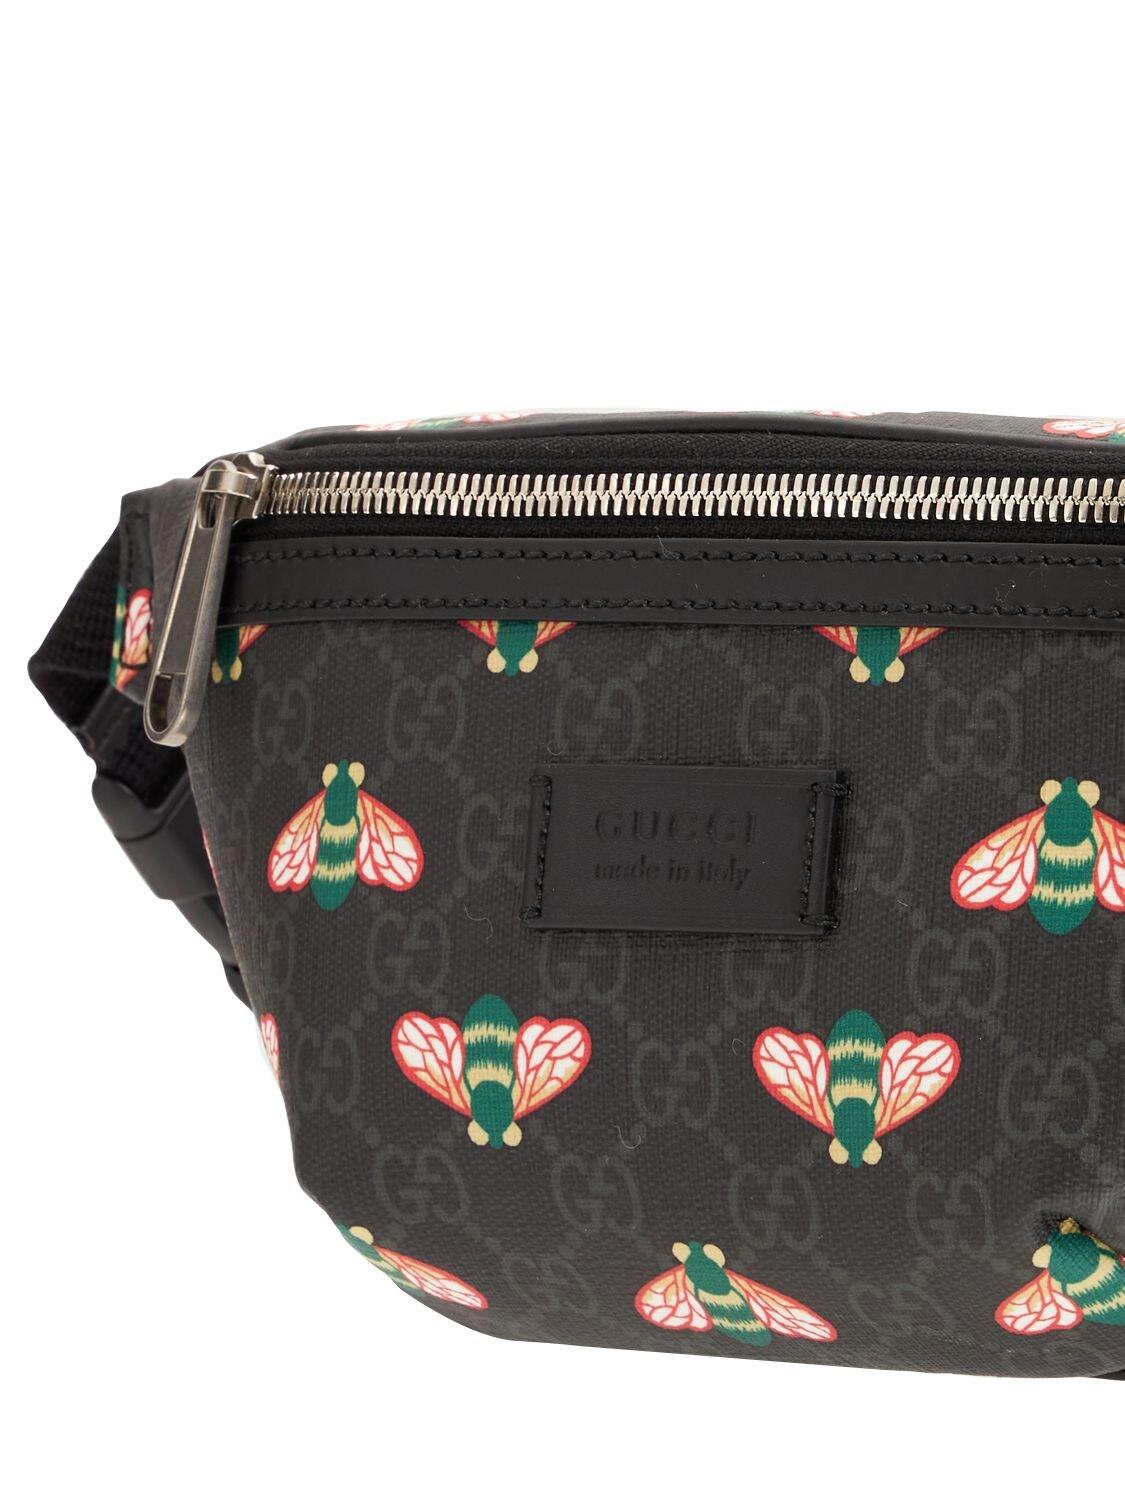 Gucci Canvas Bestiary Belt Bag With Bees in Black for Men - Lyst